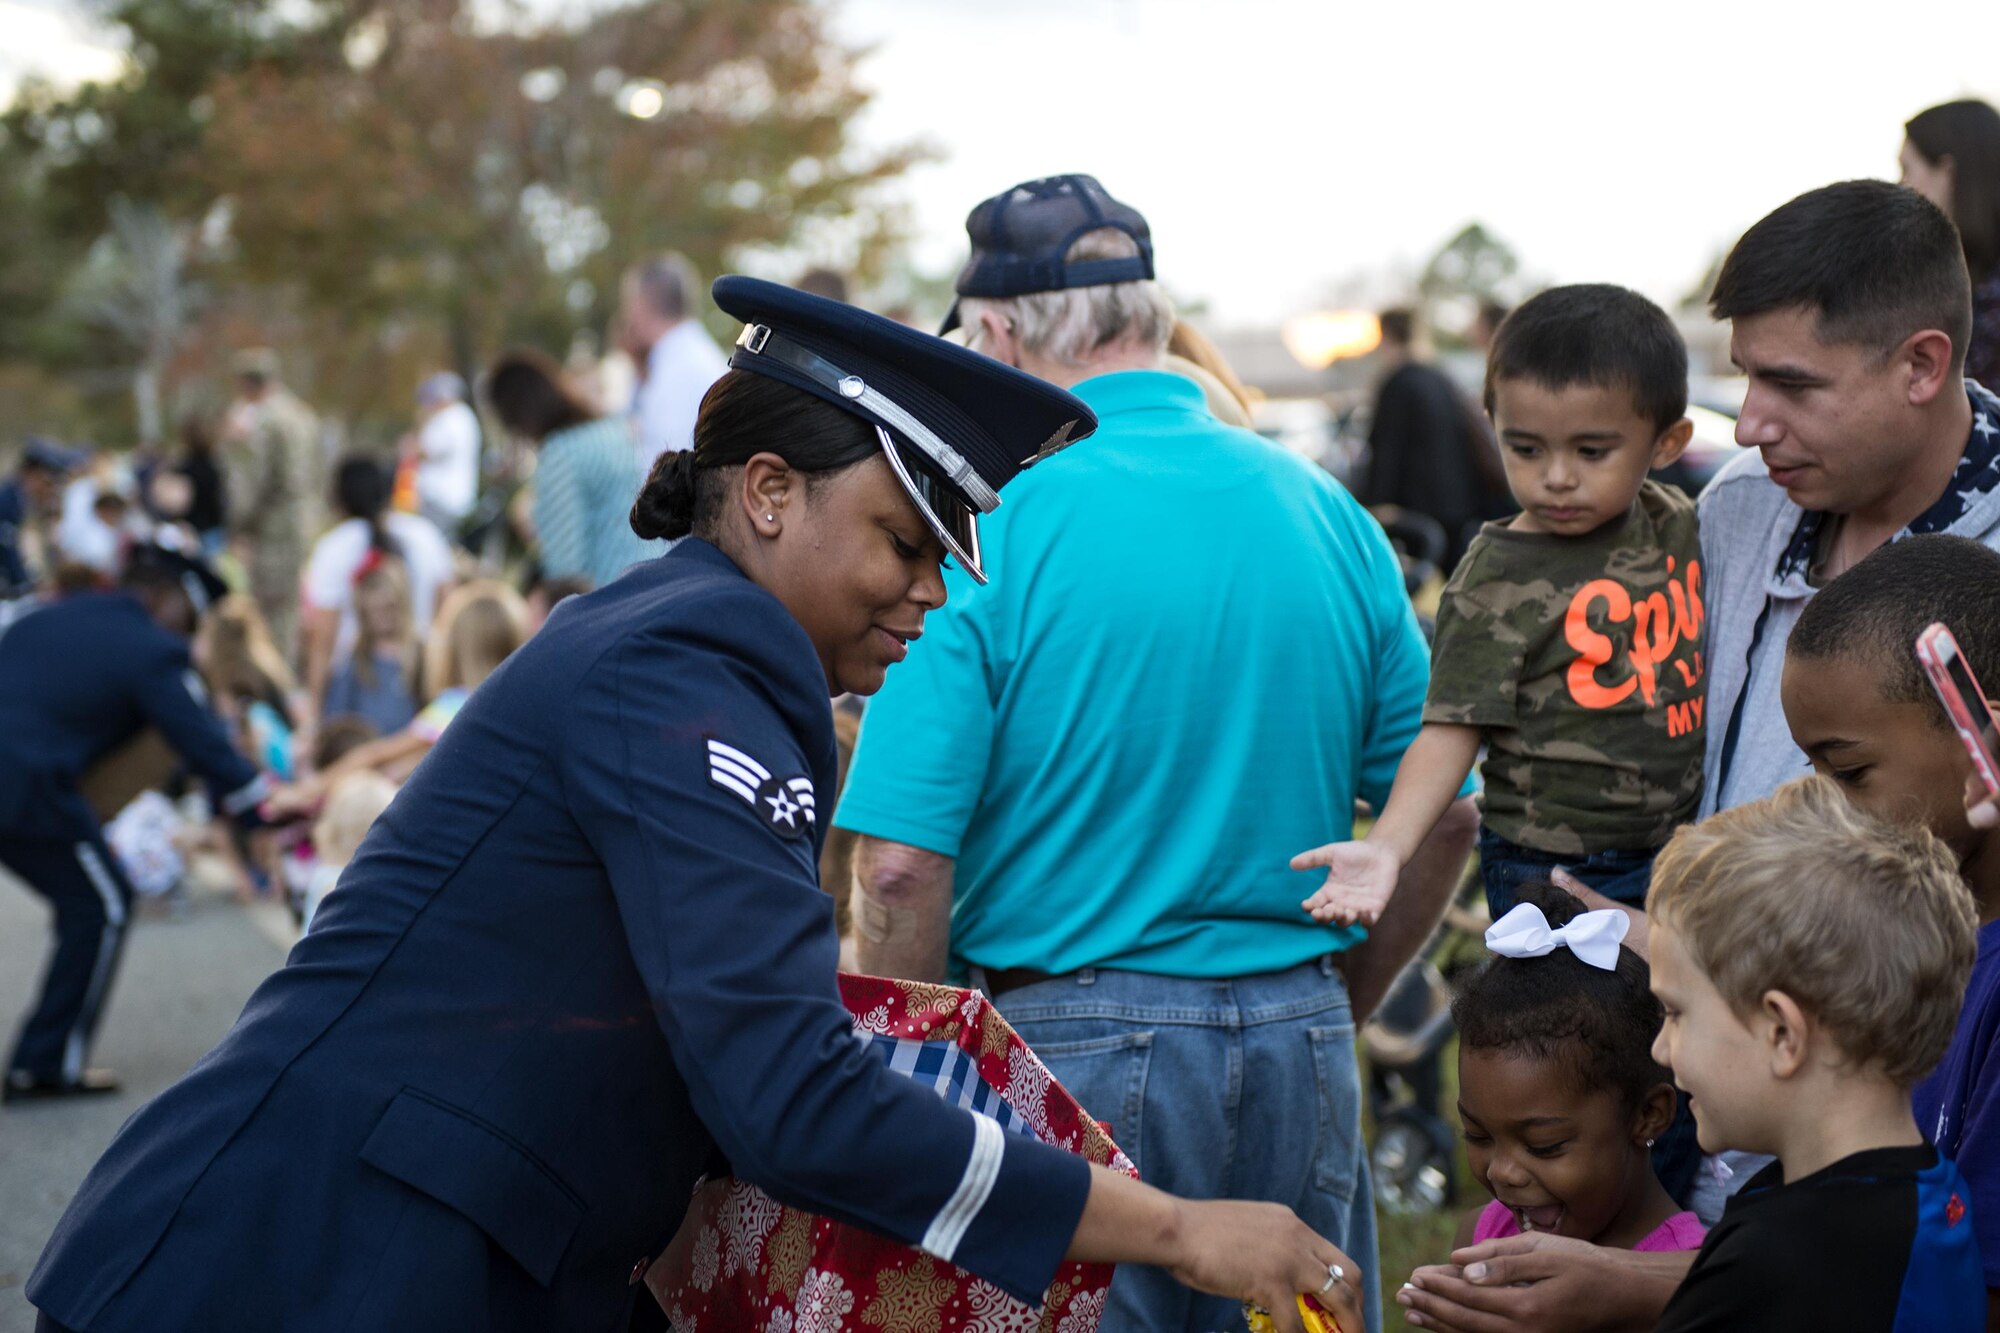 Senior Airman Jamie Smith, Moody Air Force Base ceremonial guardsman, passes out candy during a parade at the Tree Lighting Ceremony, Dec. 1, 2017, at Moody AFB, Ga. The annual event brings the base community together as a way to show thanks for their continuous sacrifice and celebrate the holiday season. The celebration included a parade, raffle give-a-ways, children’s activities and traditional lighting of the base Christmas tree by families of deployed Airmen. (U.S. Air Force photo by Airman 1st Class Erick Requadt)